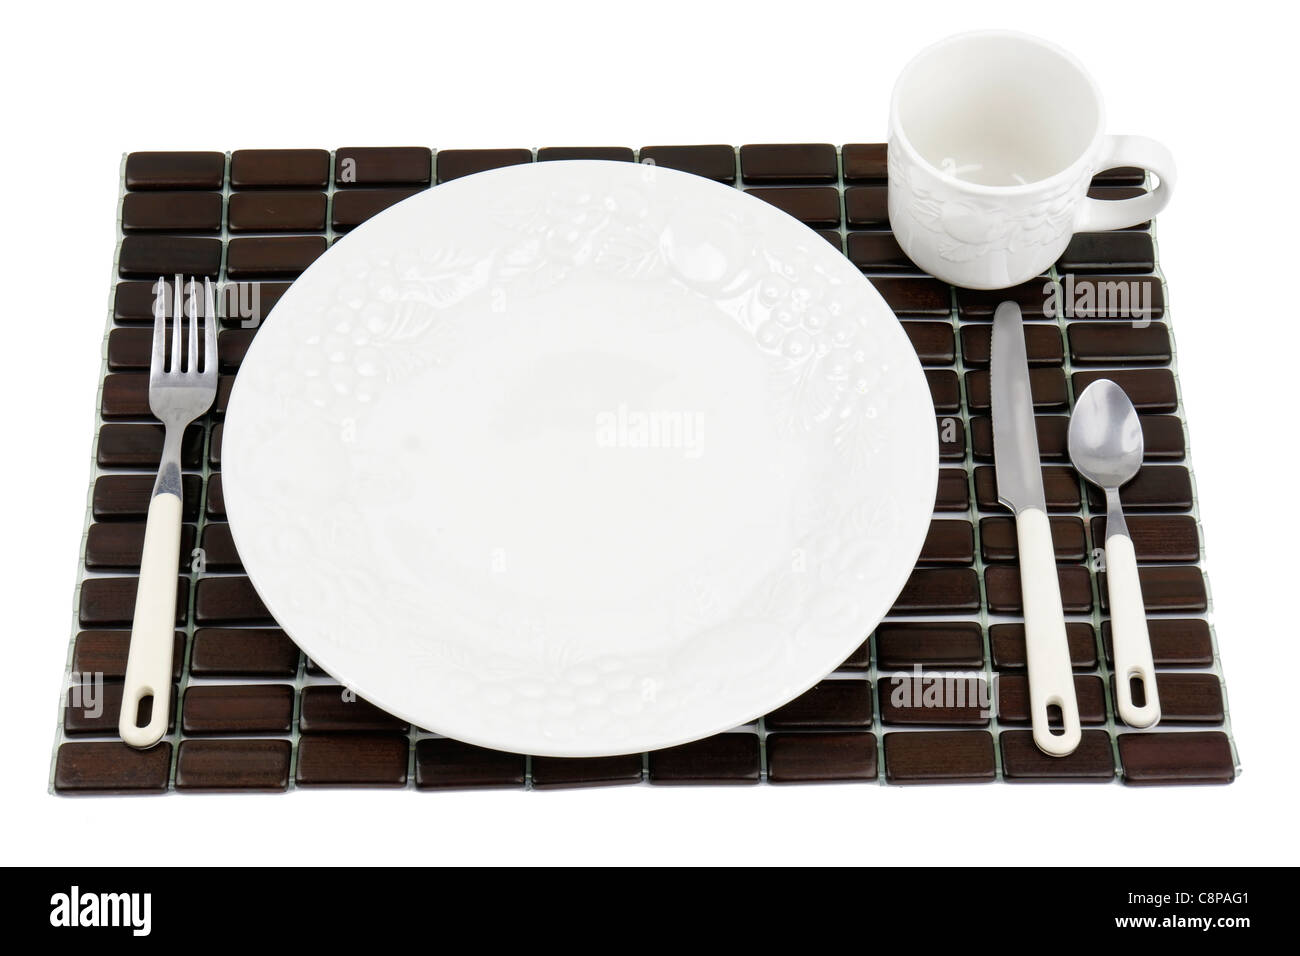 Dinner plate, white textured China with grapes and tomatoes design over a dark wood place mat. Stock Photo